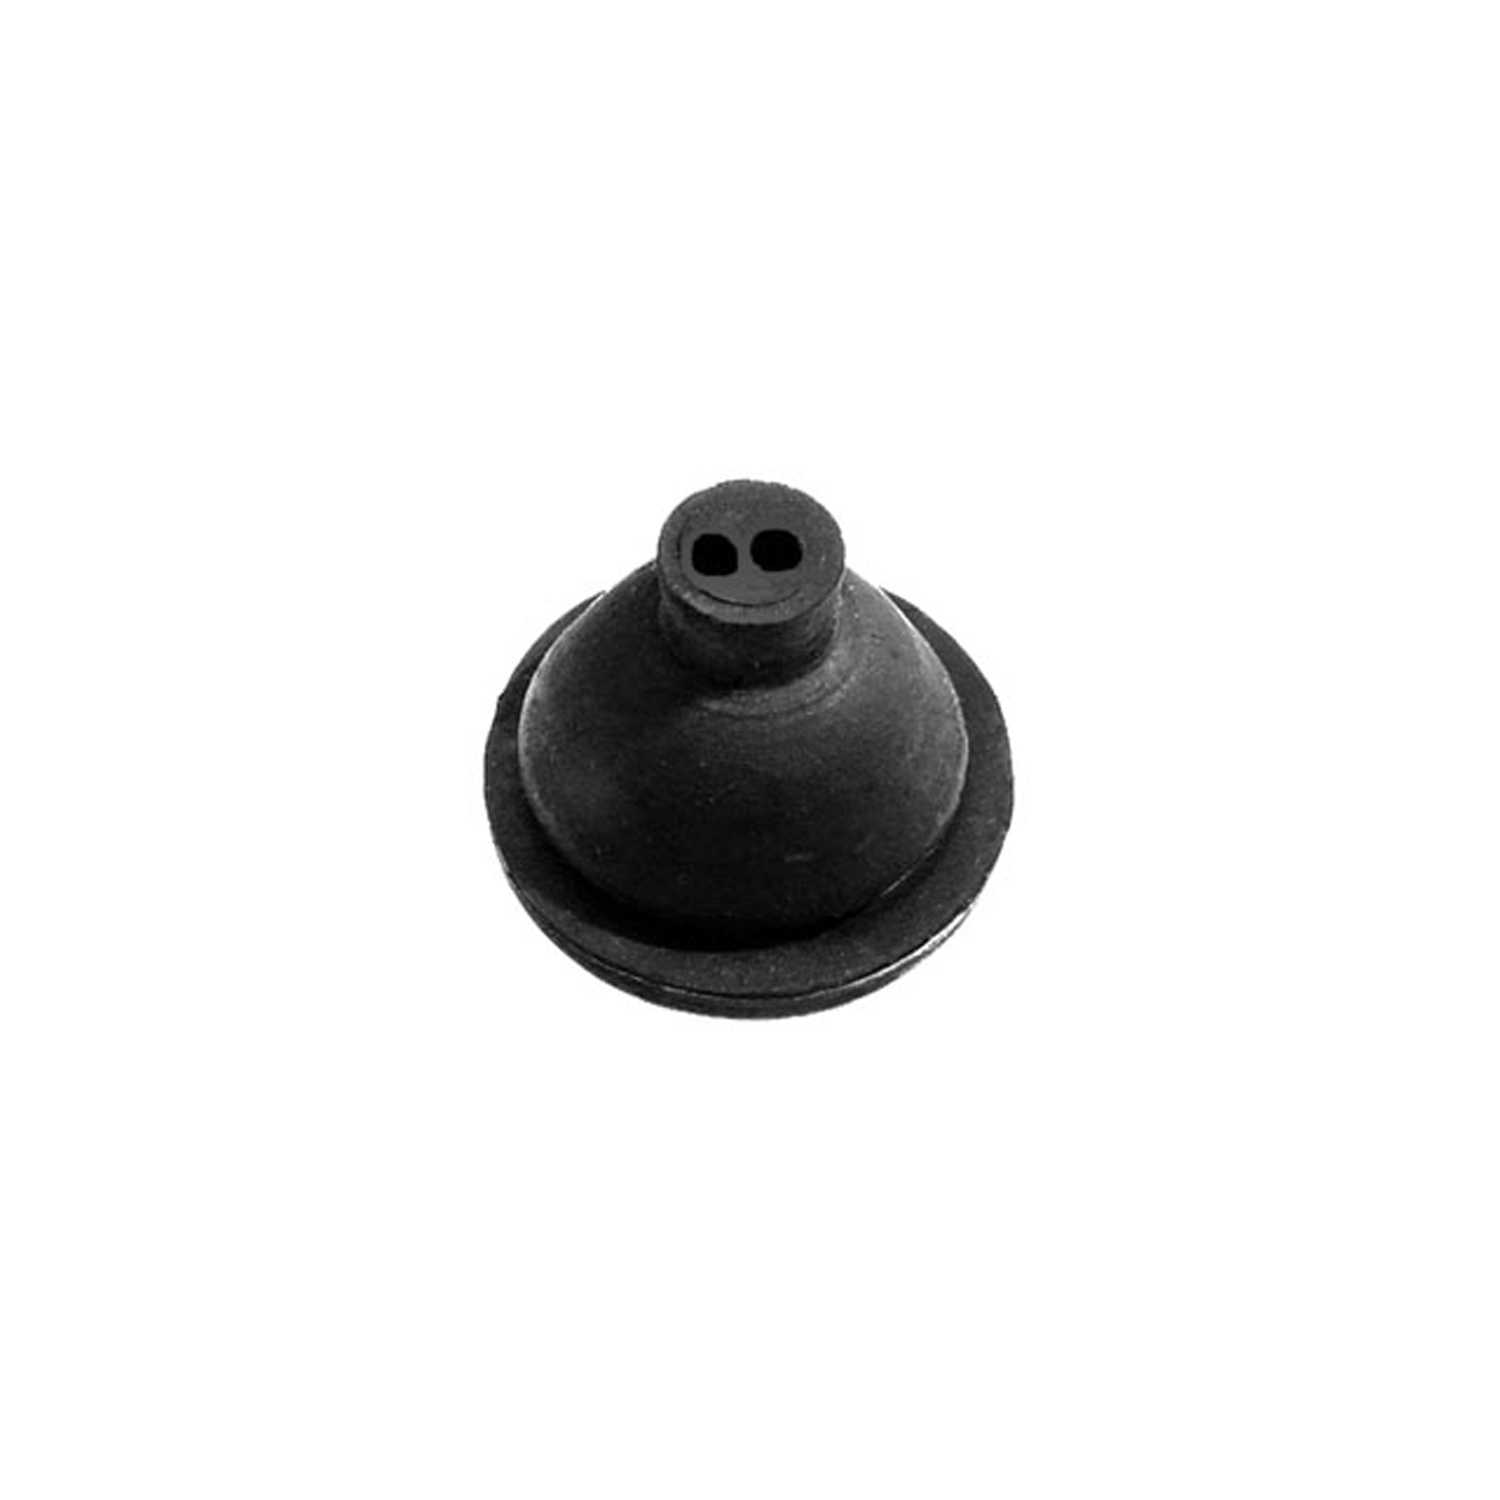 1971 GMC C25/C2500 Suburban Dash  Firewall Grommet.  Double-hole type for two wires-RP 1-G